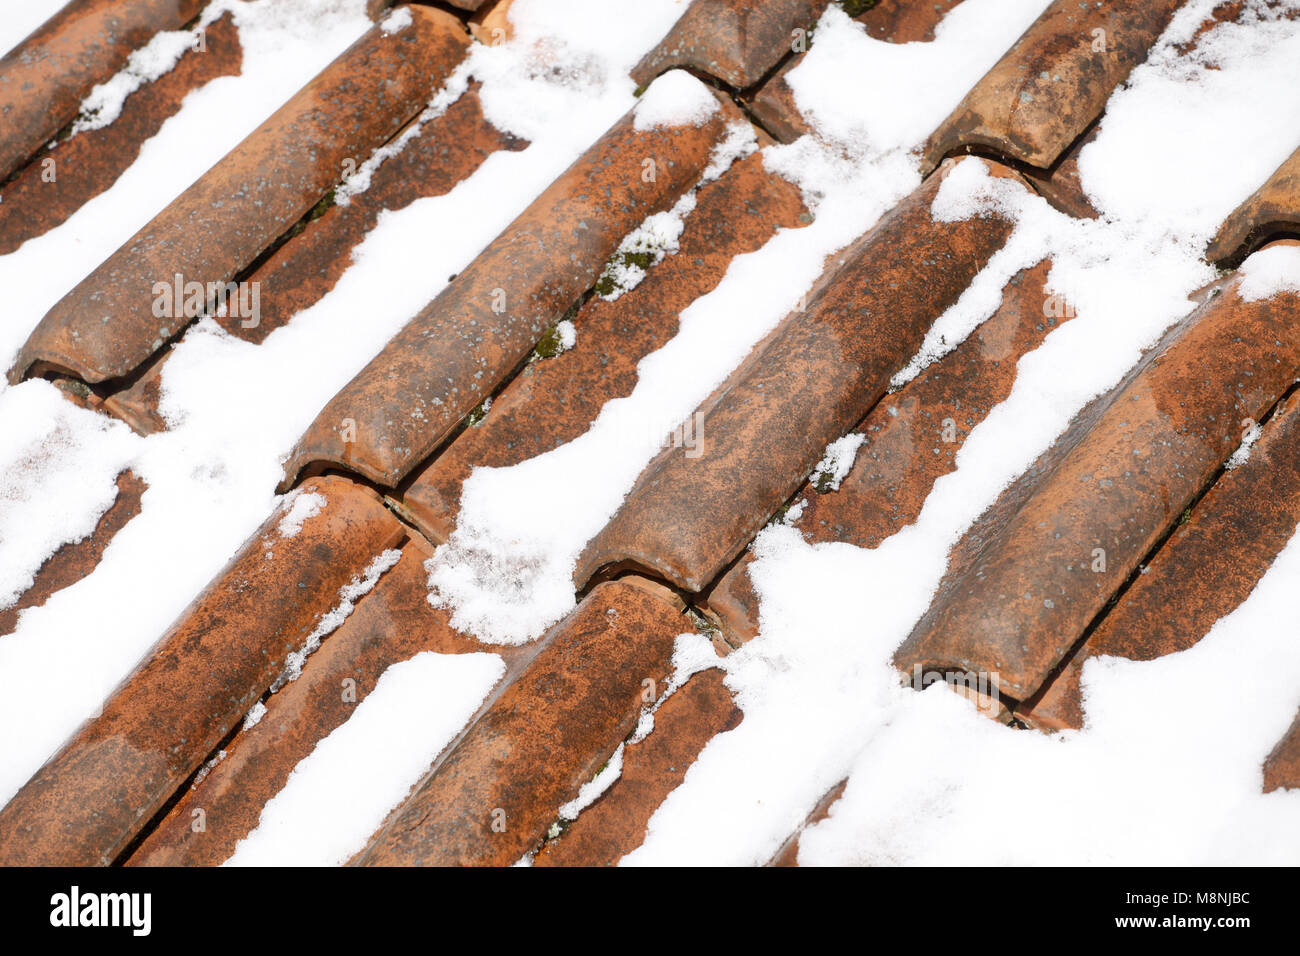 Roof tiles with recent snow fall covering them in winter Stock Photo